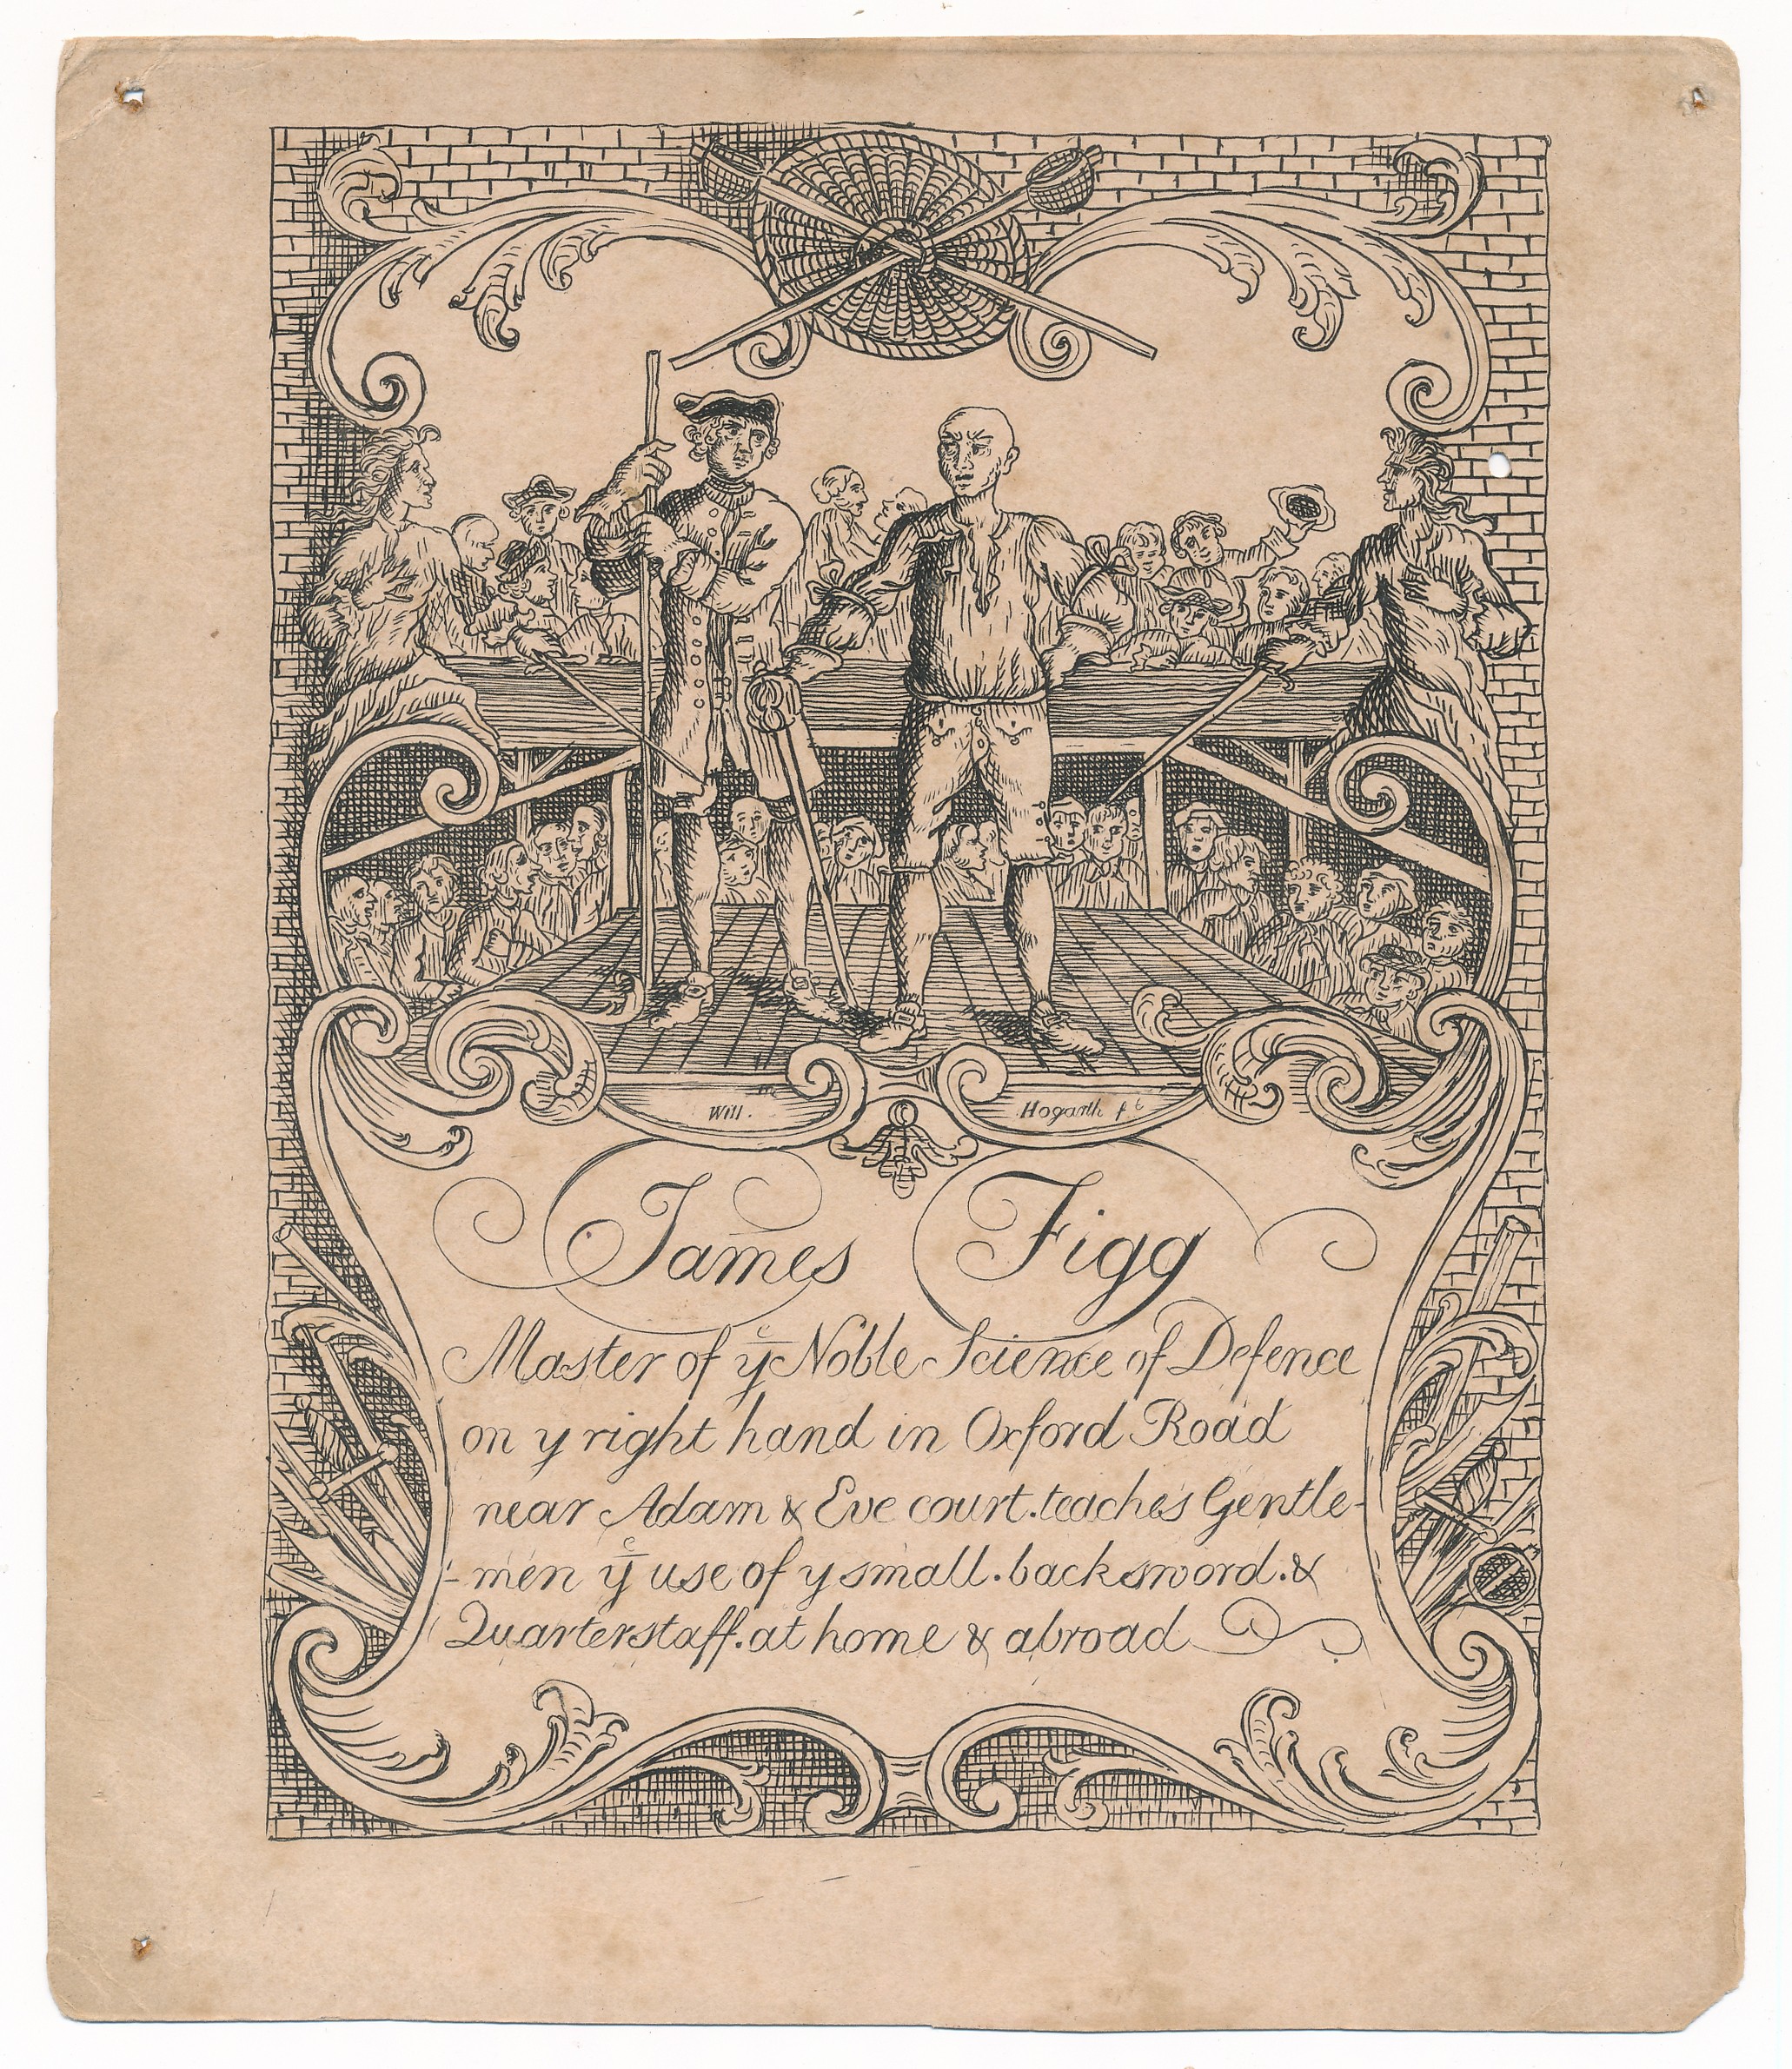 Early trade card of James Figg "Master of the Noble Science of Defence", by Anna Maria, Ireland,